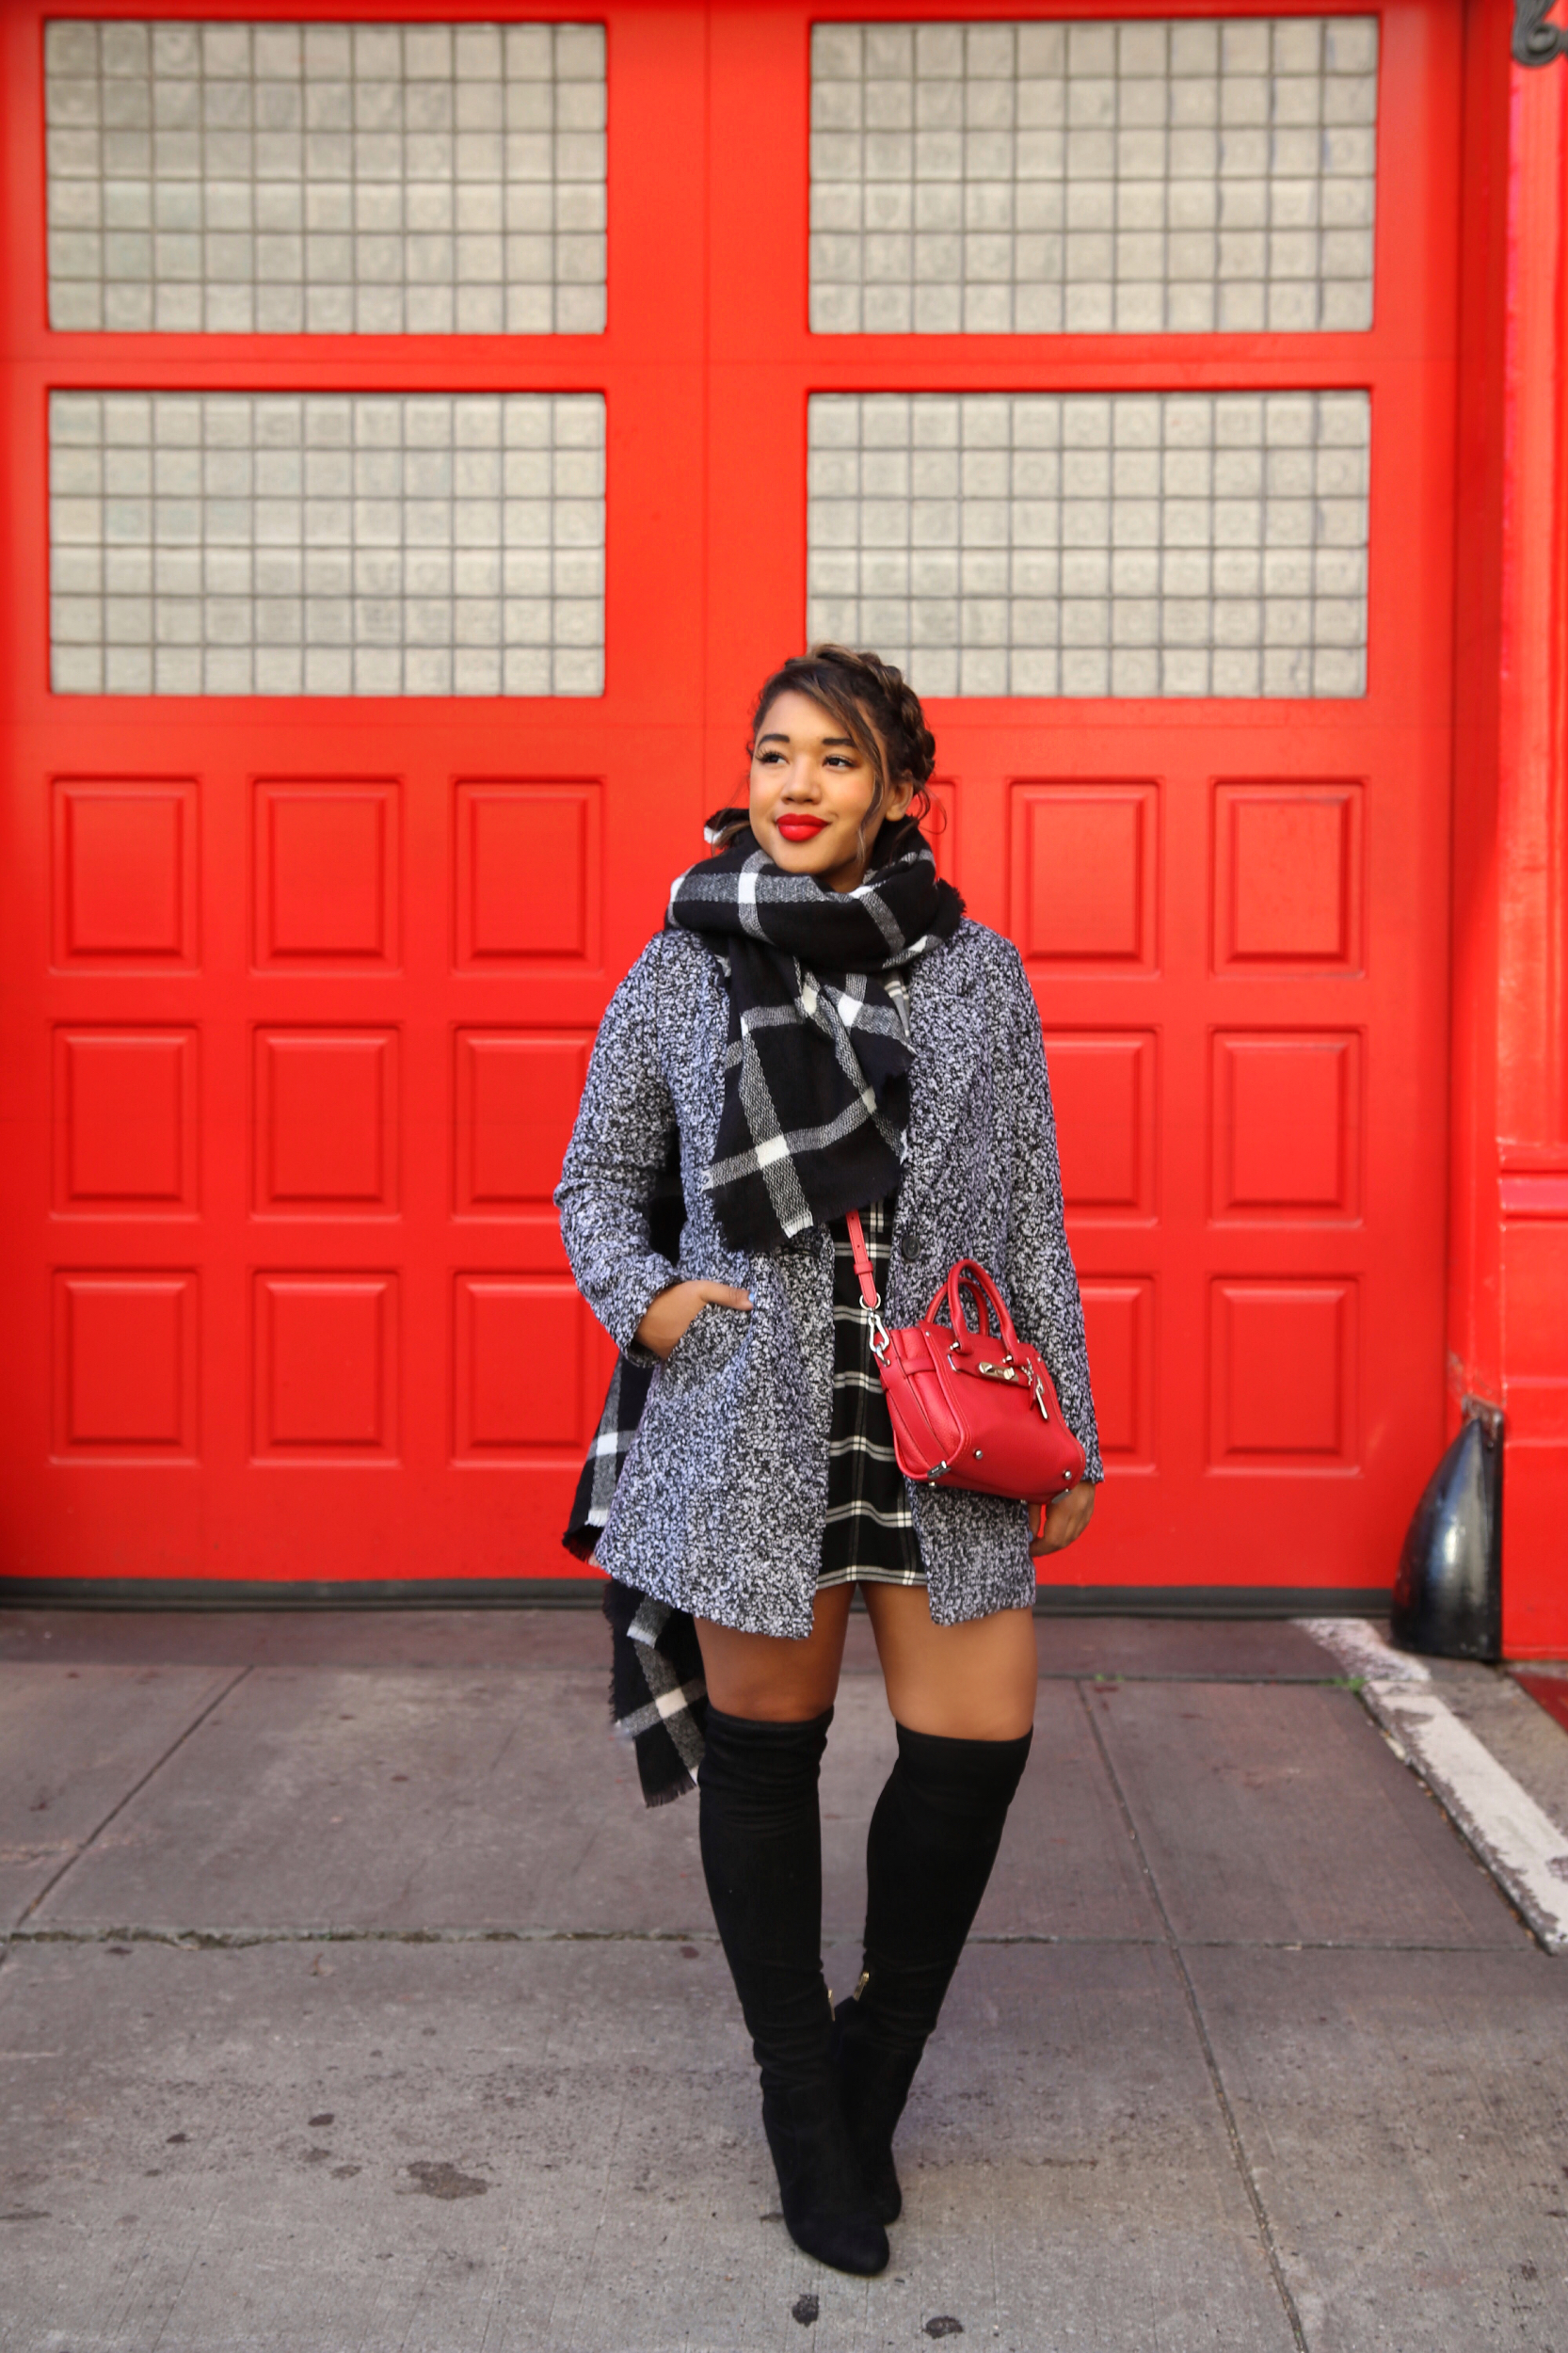 Blanket Scarf Styling! Fall style by Color Me Courtney (@colormecourtney) // How to wear plaid for fall #plaid #overthekneeboots #otkboot #patternmixing #blackandwhite